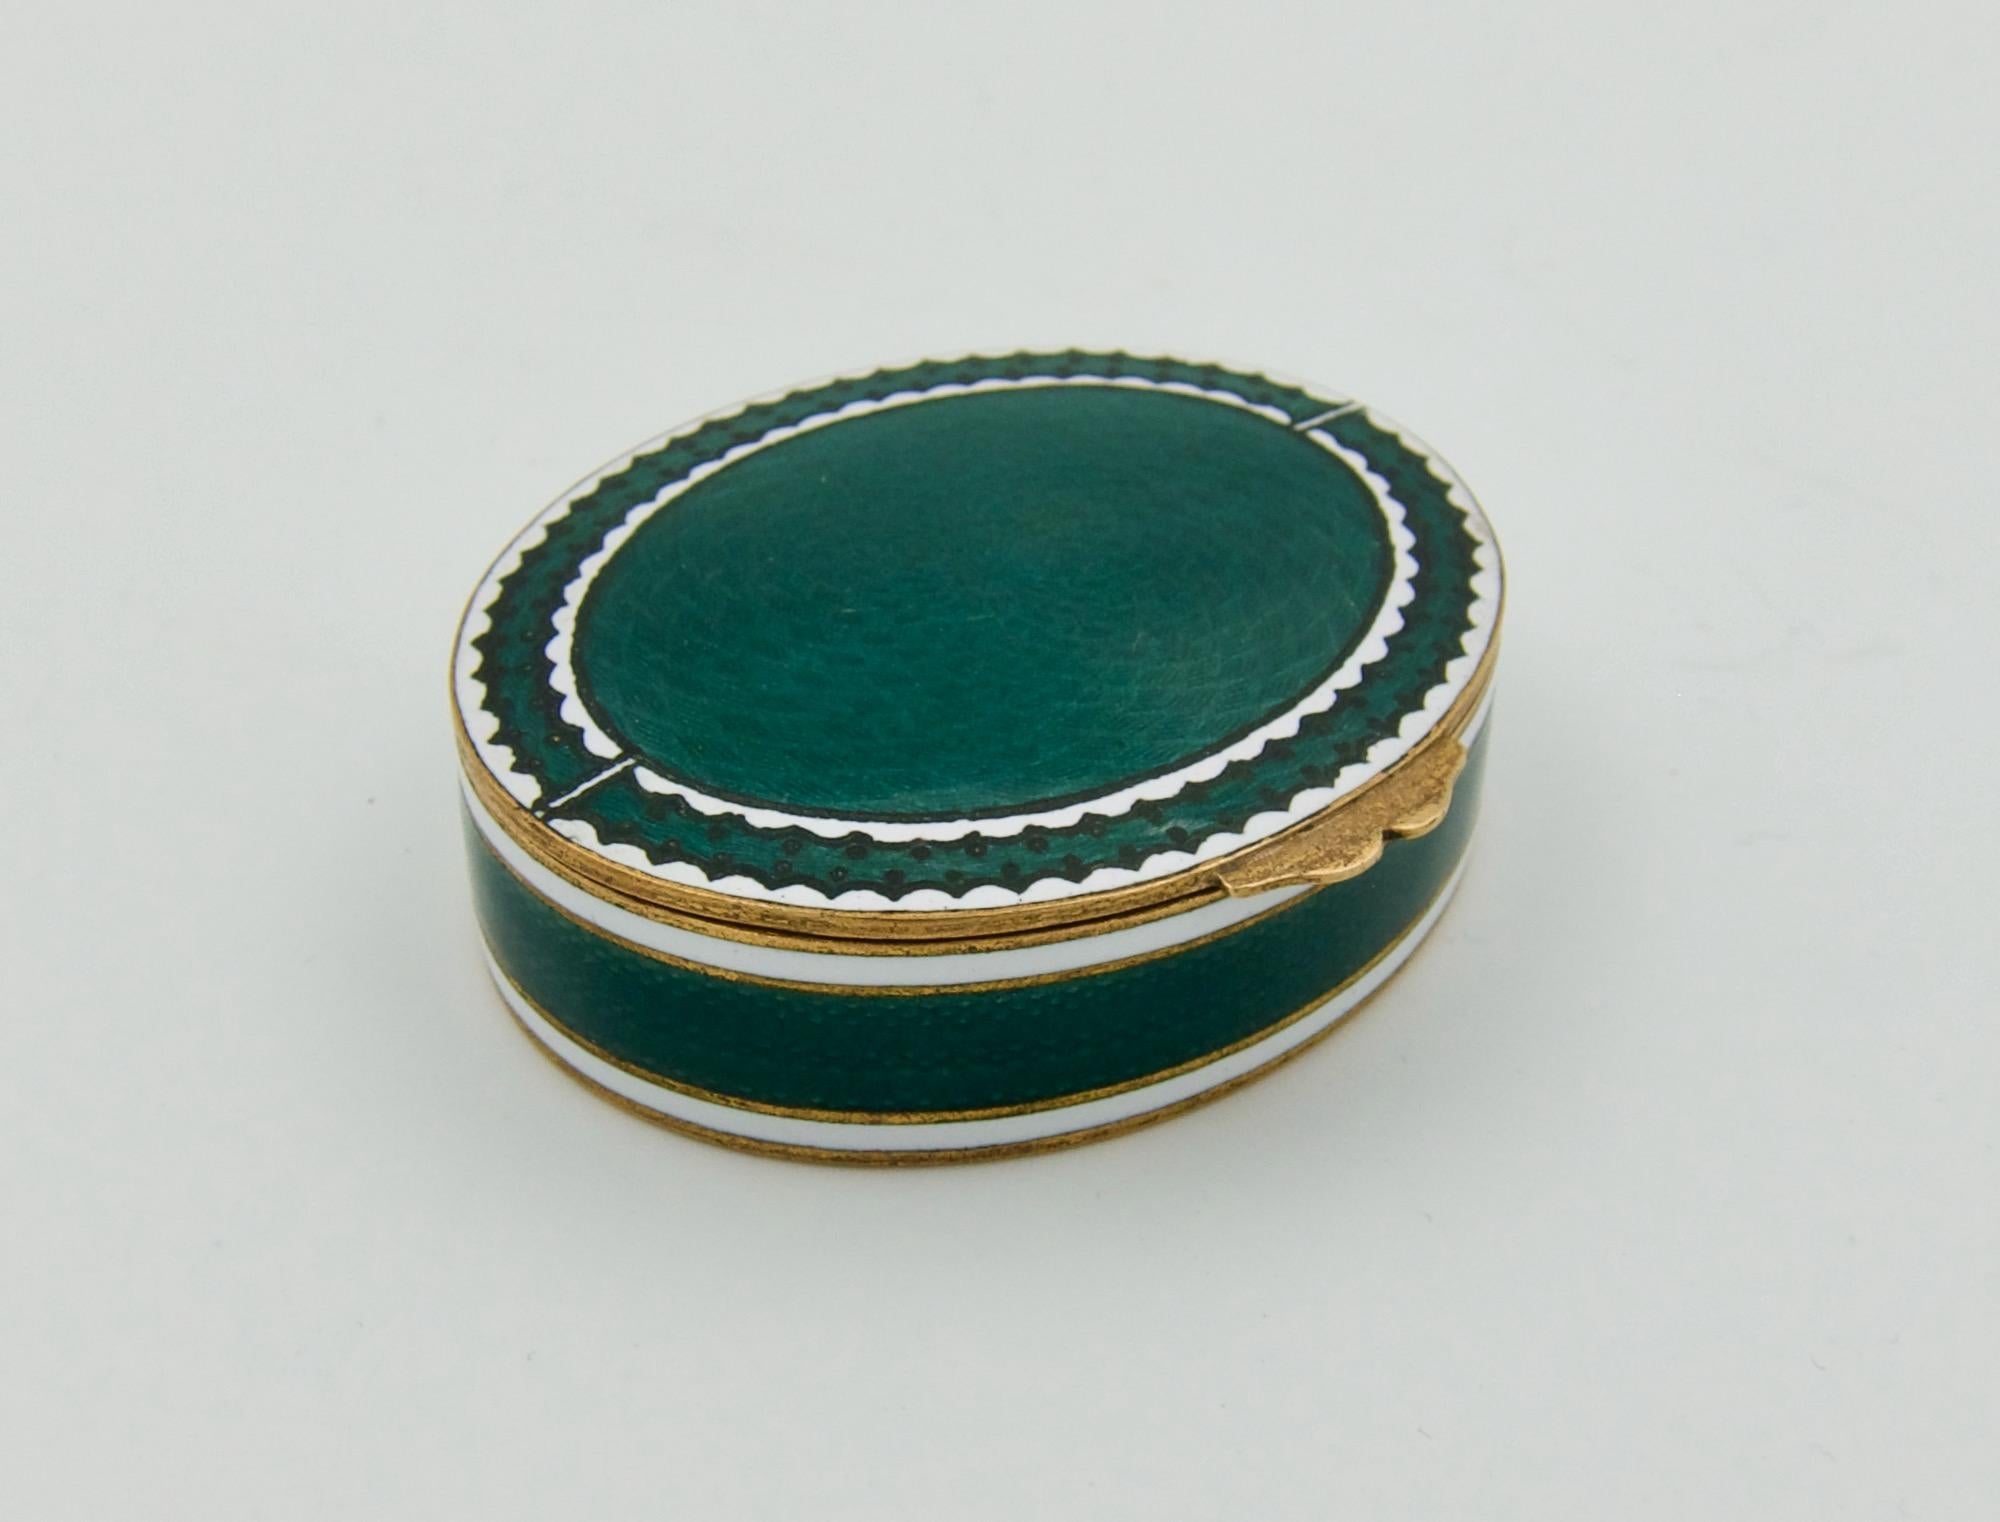 An antique snuff or pill box in gilt metal with guilloche enamel decoration in green, black, and white. The hinged box of elliptical form is raised by a simple thumb piece. The lid is decorated with a field of dark green enamel over an engine-turned